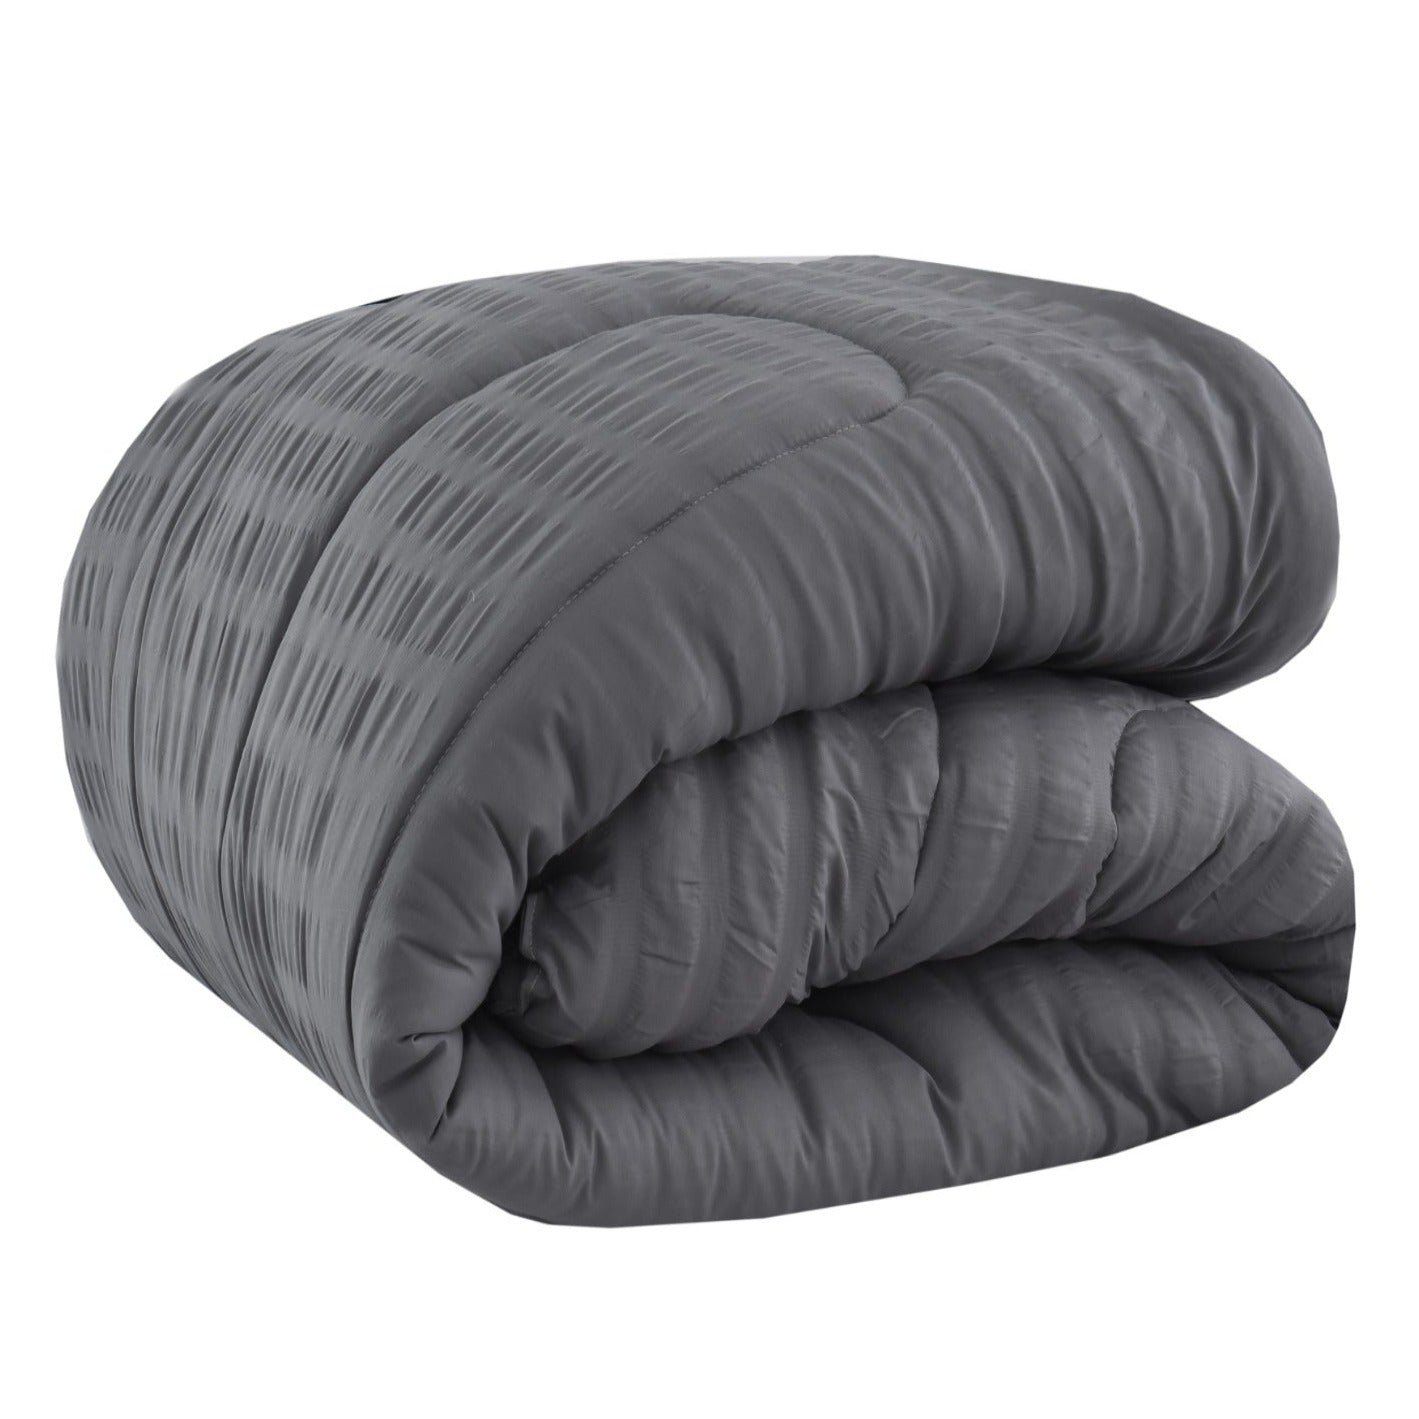 1 PC Double Winter Comforter-Grey Sequence Apricot